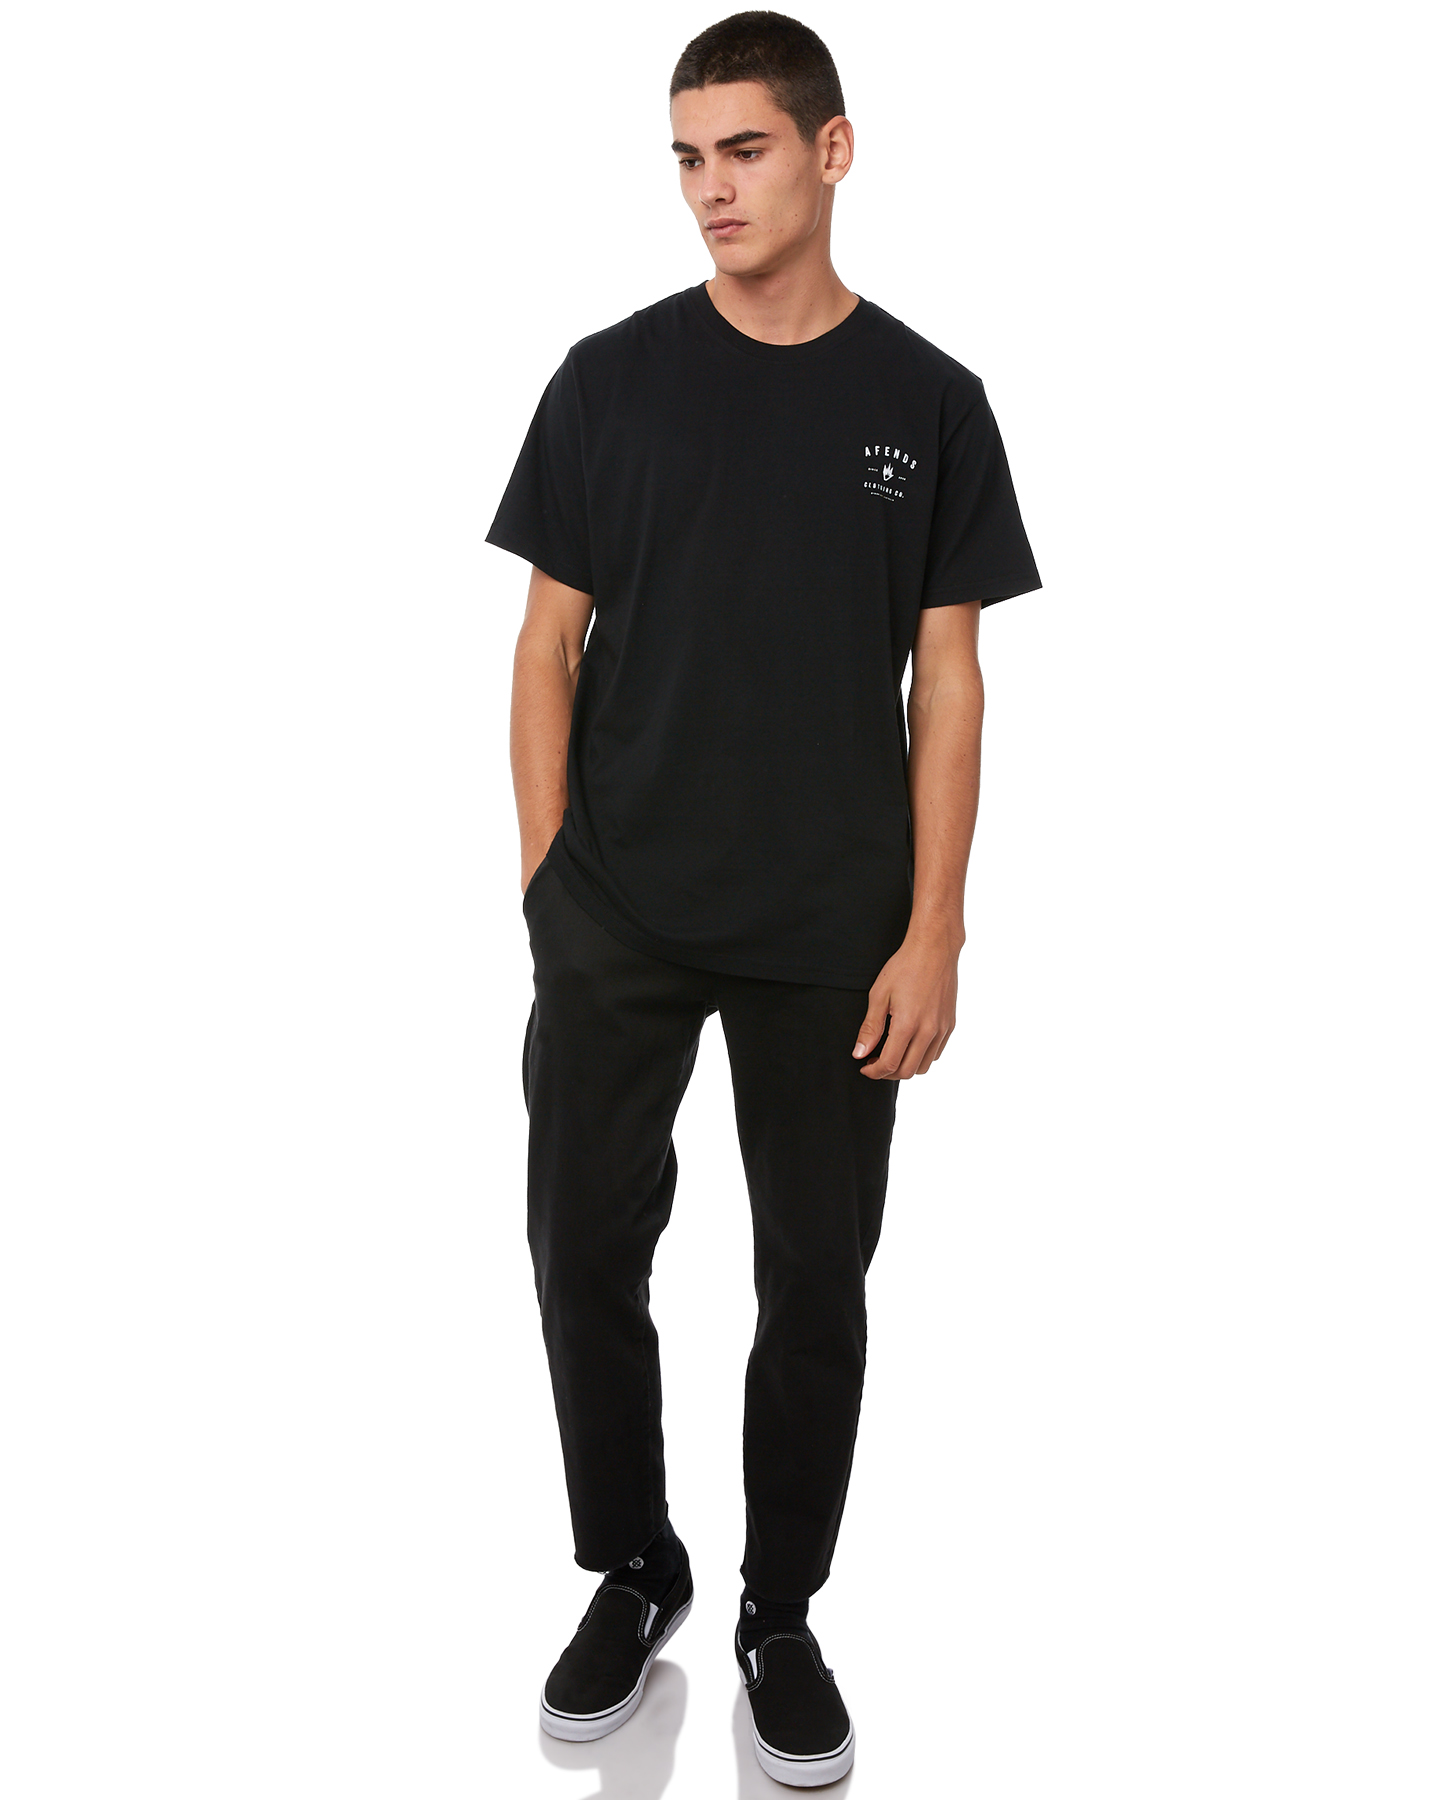 Afends Clothing Co Mens Tee - Black | SurfStitch